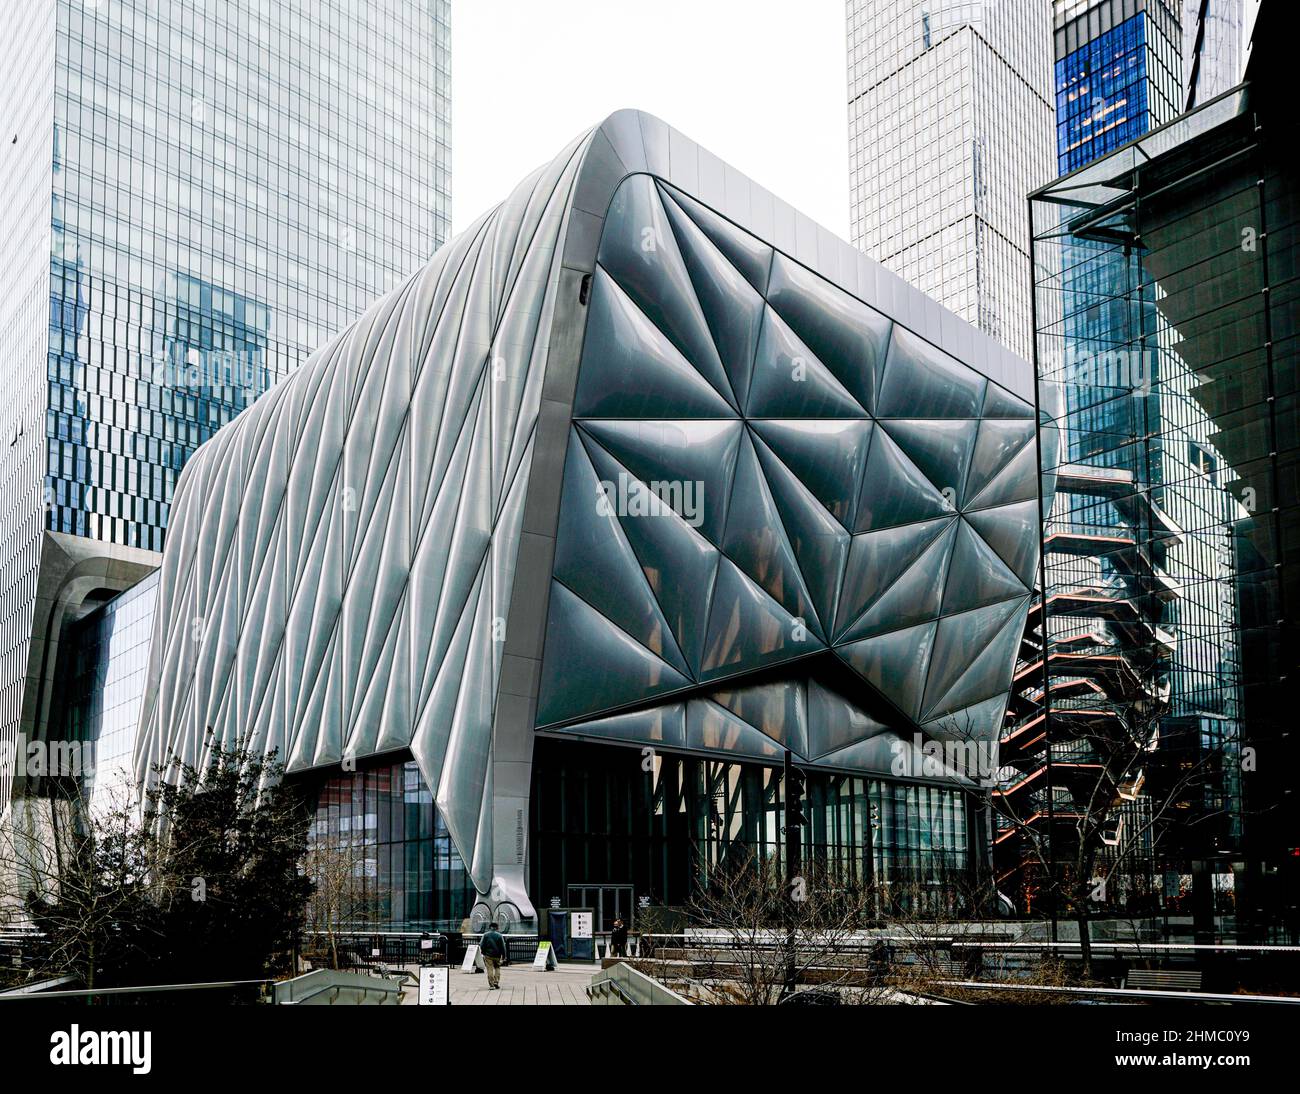 https://c8.alamy.com/comp/2HMC0Y9/the-sheds-bloomberg-building-designed-by-diller-scofidio-renfro-is-an-iconic-space-with-moveable-outershell-for-large-scale-performances-install-2HMC0Y9.jpg